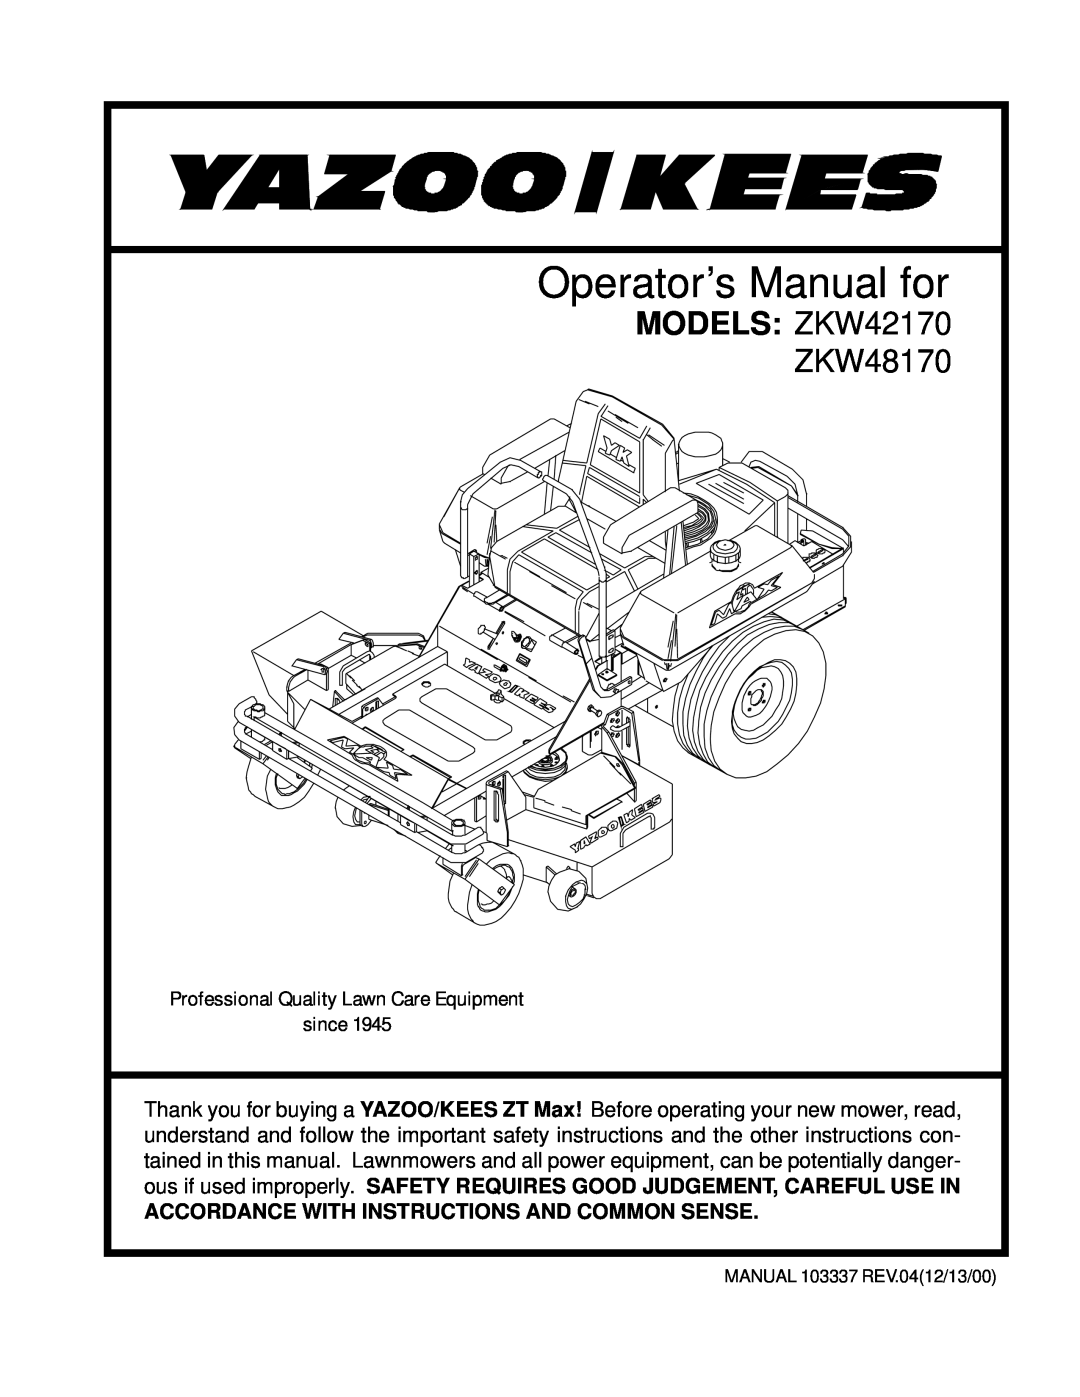 Yazoo/Kees important safety instructions Operator’s Manual for, MODELS ZKW42170, ZKW48170 